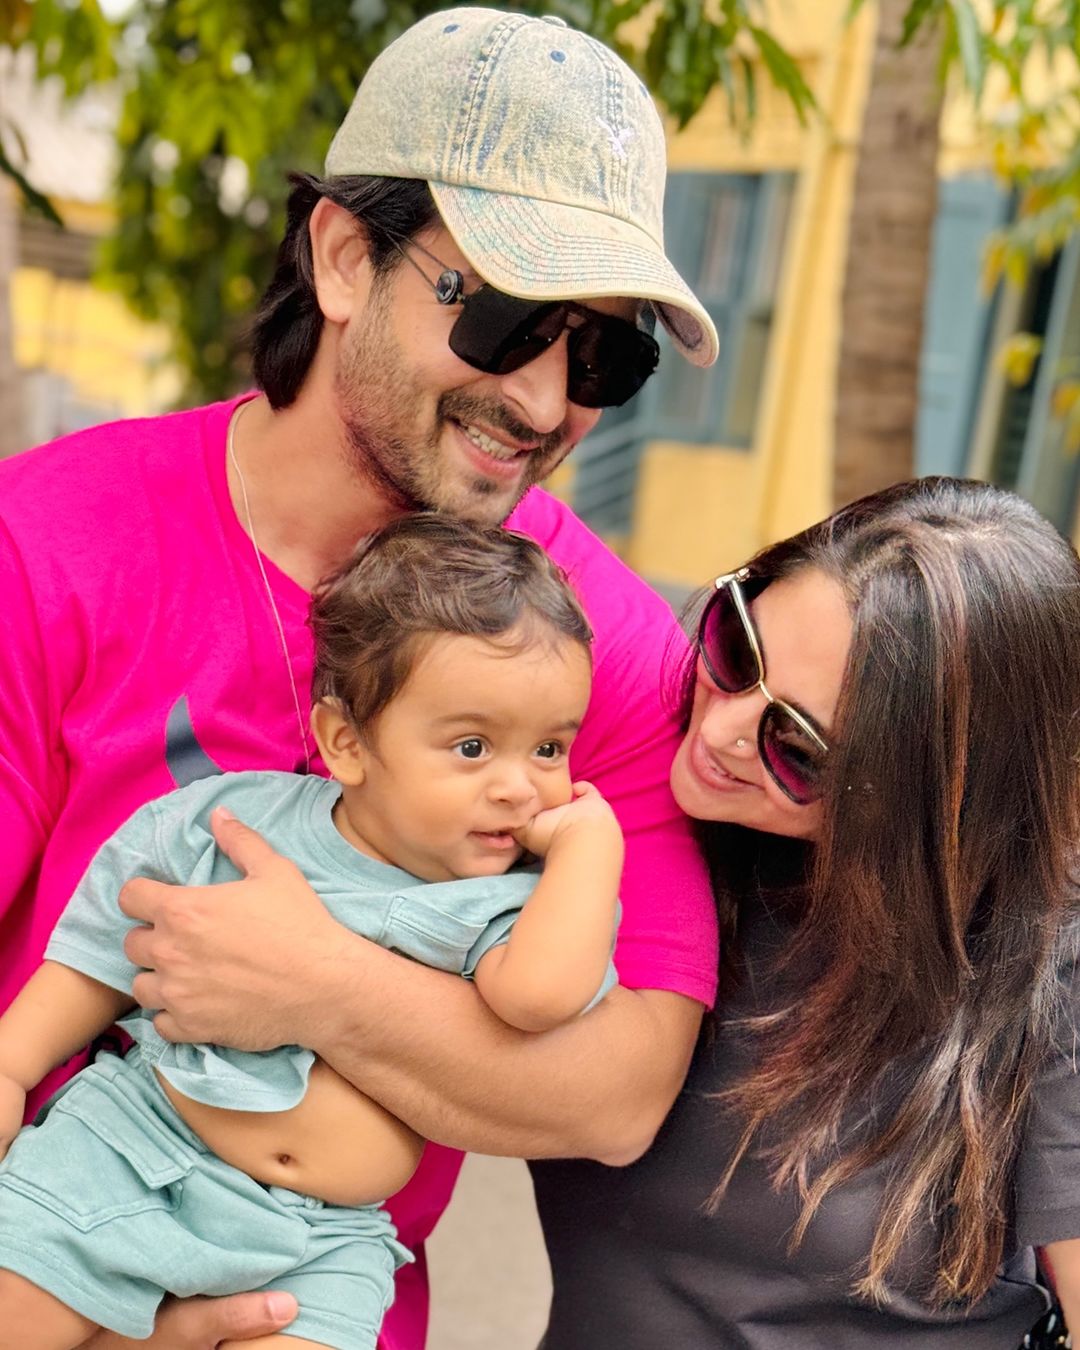 Shoaib Ibrahim's Latest Vlog Reveals His Son Ruhaan’s Injury, Which Made Dipika Kakar In Tears. Check Out More Details About It!